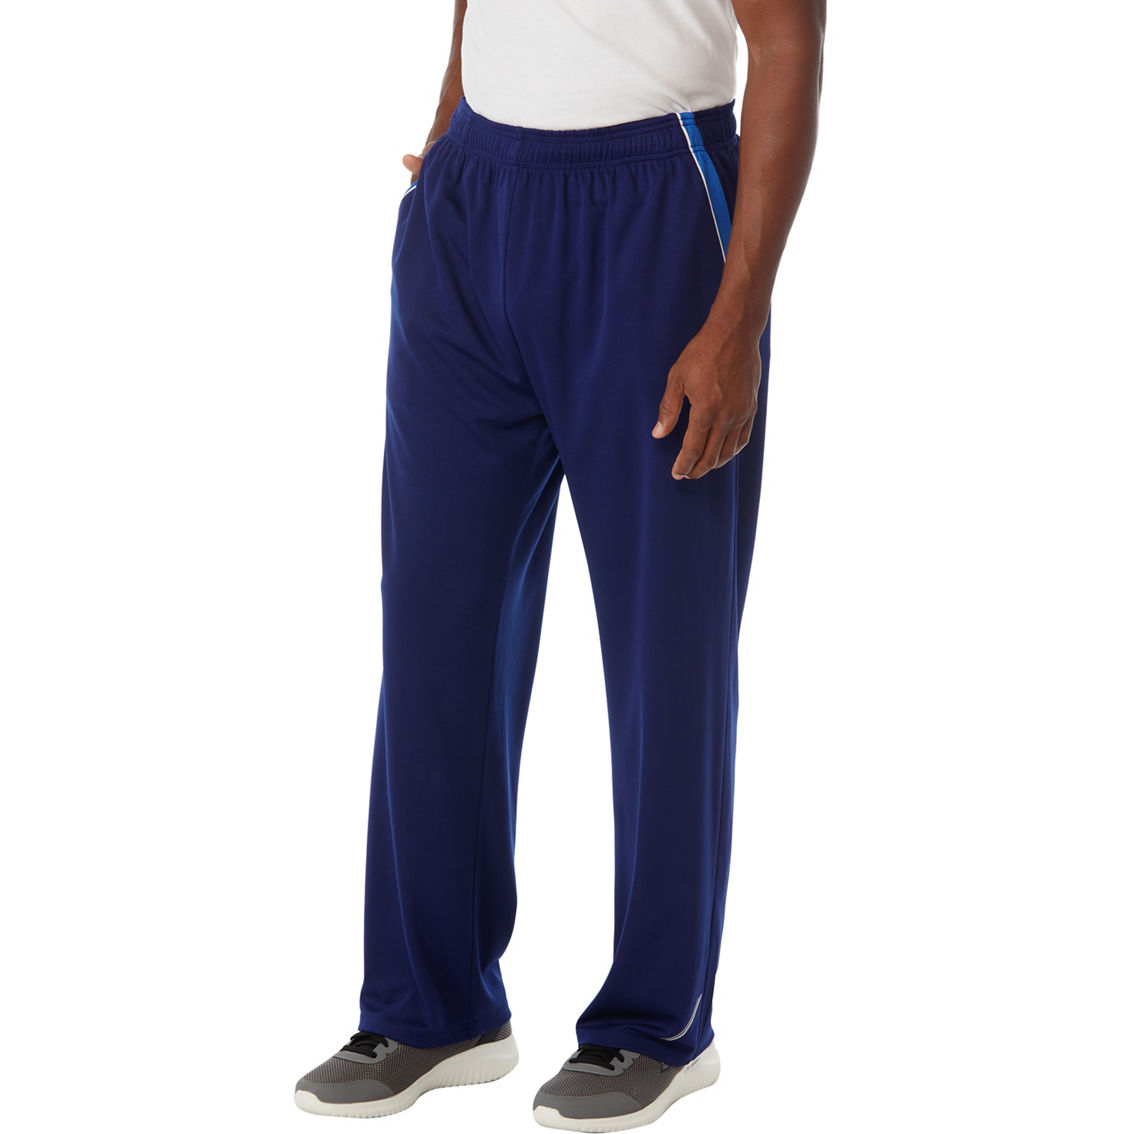 Pbx Pro Polyester Pants | Pants | Clothing & Accessories | Shop The ...